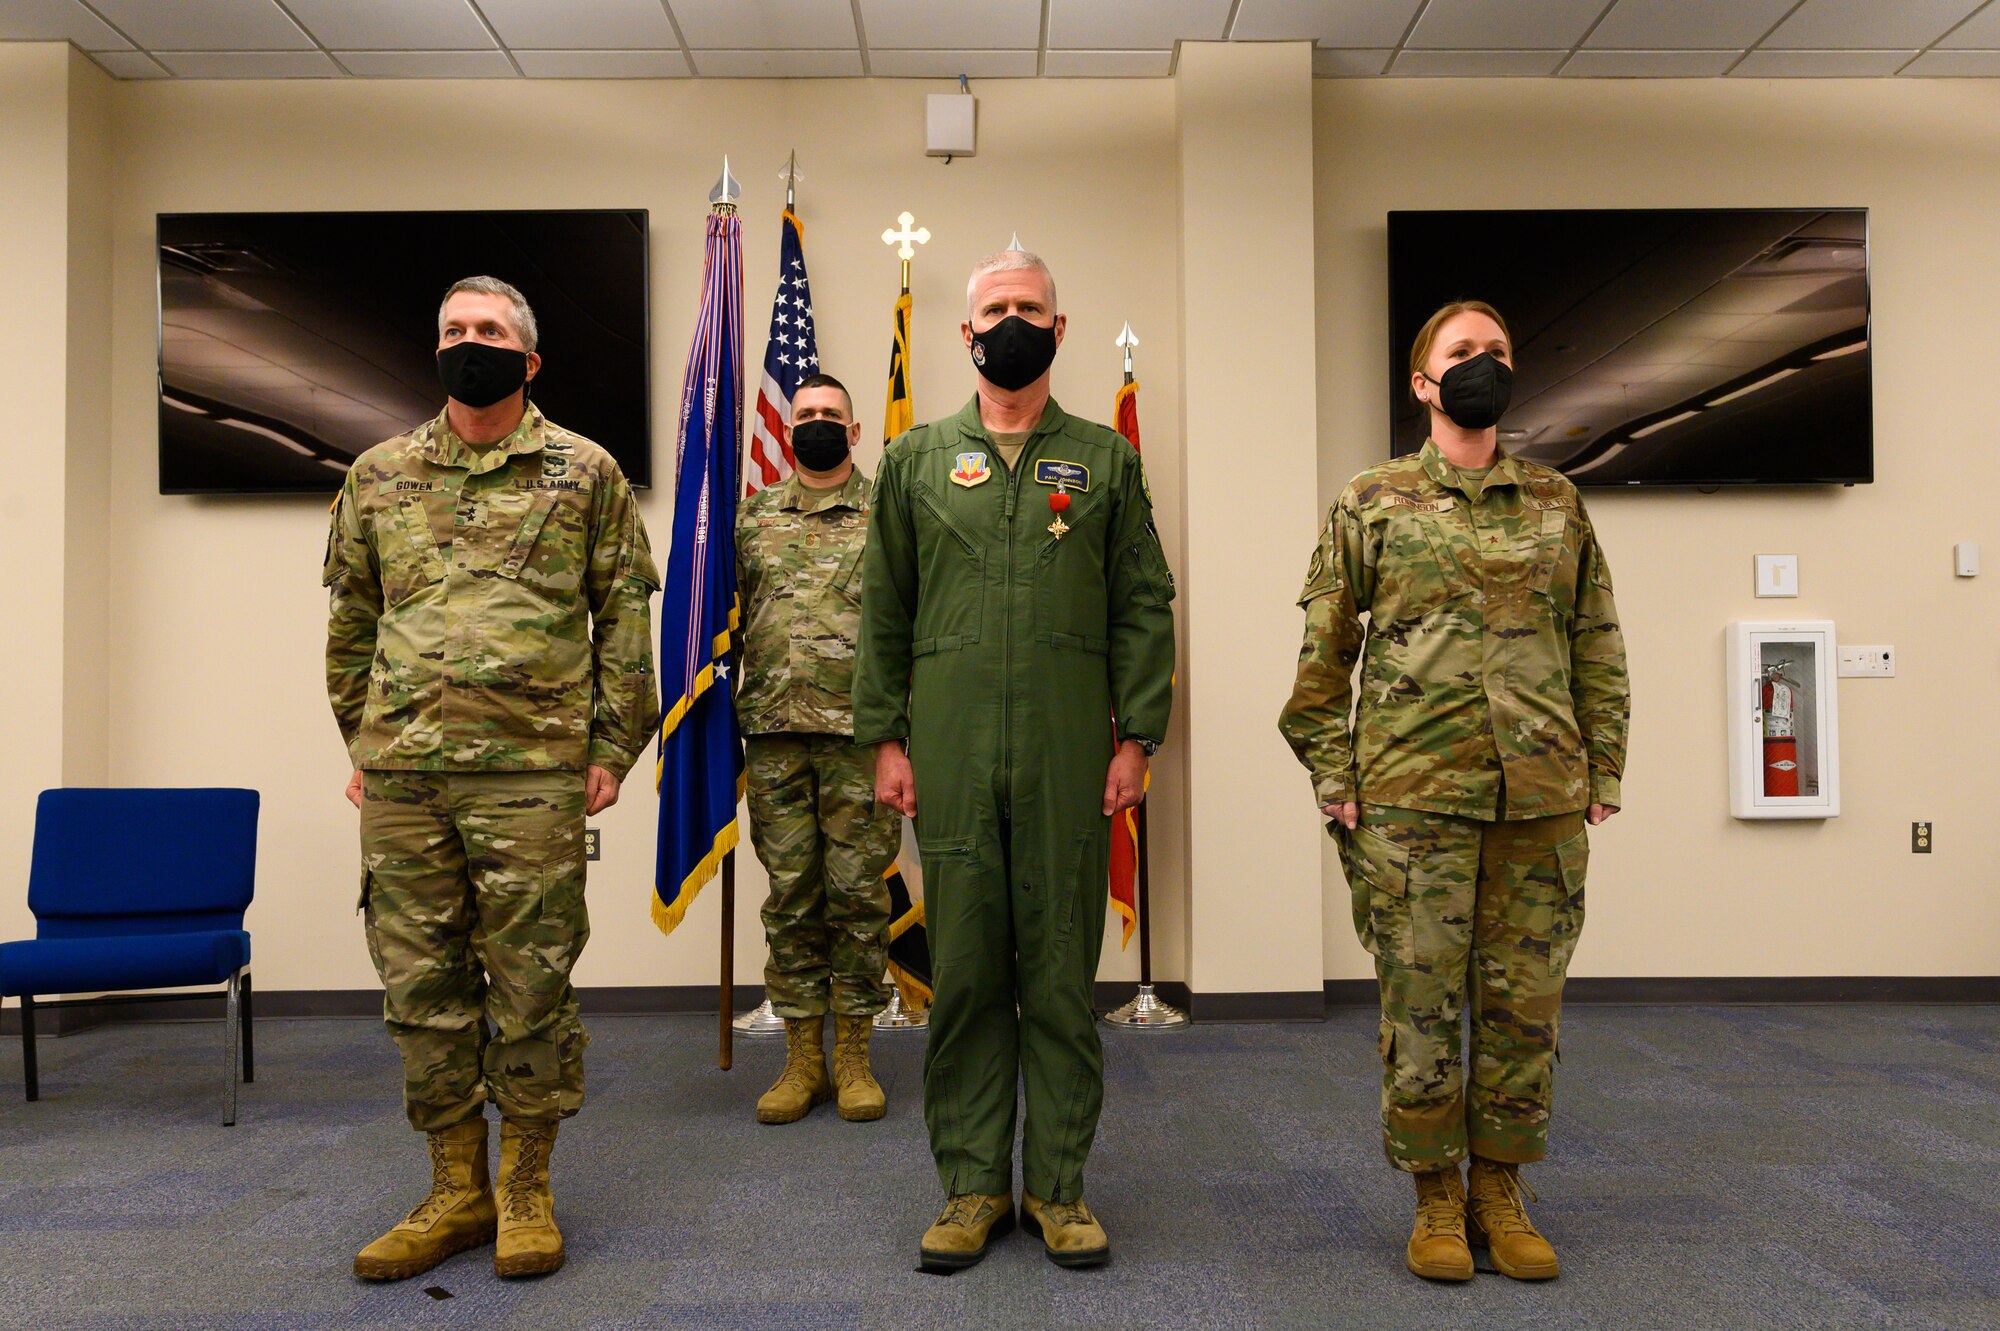 U.S. Army Maj. Gen. Timothy E. Gowen, the adjutant general for Maryland, U.S. Air Force Brig. Gen. Paul D. Johnson, the commander of the 175th Wing, and U.S. Air Force Brig. Gen. Jori A. Robinson, the incoming commander, stand at attention during a change of command ceremony on Jan. 7, 2022, at Warfield Air National Guard Base at Martin State Airport, Middle River, Maryland. Members of the Maryland National Guard gathered for the socially distanced ceremony to bid farewell to Johnson, the outgoing commander, and welcomed U.S. Air Force Brig. Gen. Jori A. Robinson, the incoming commander.